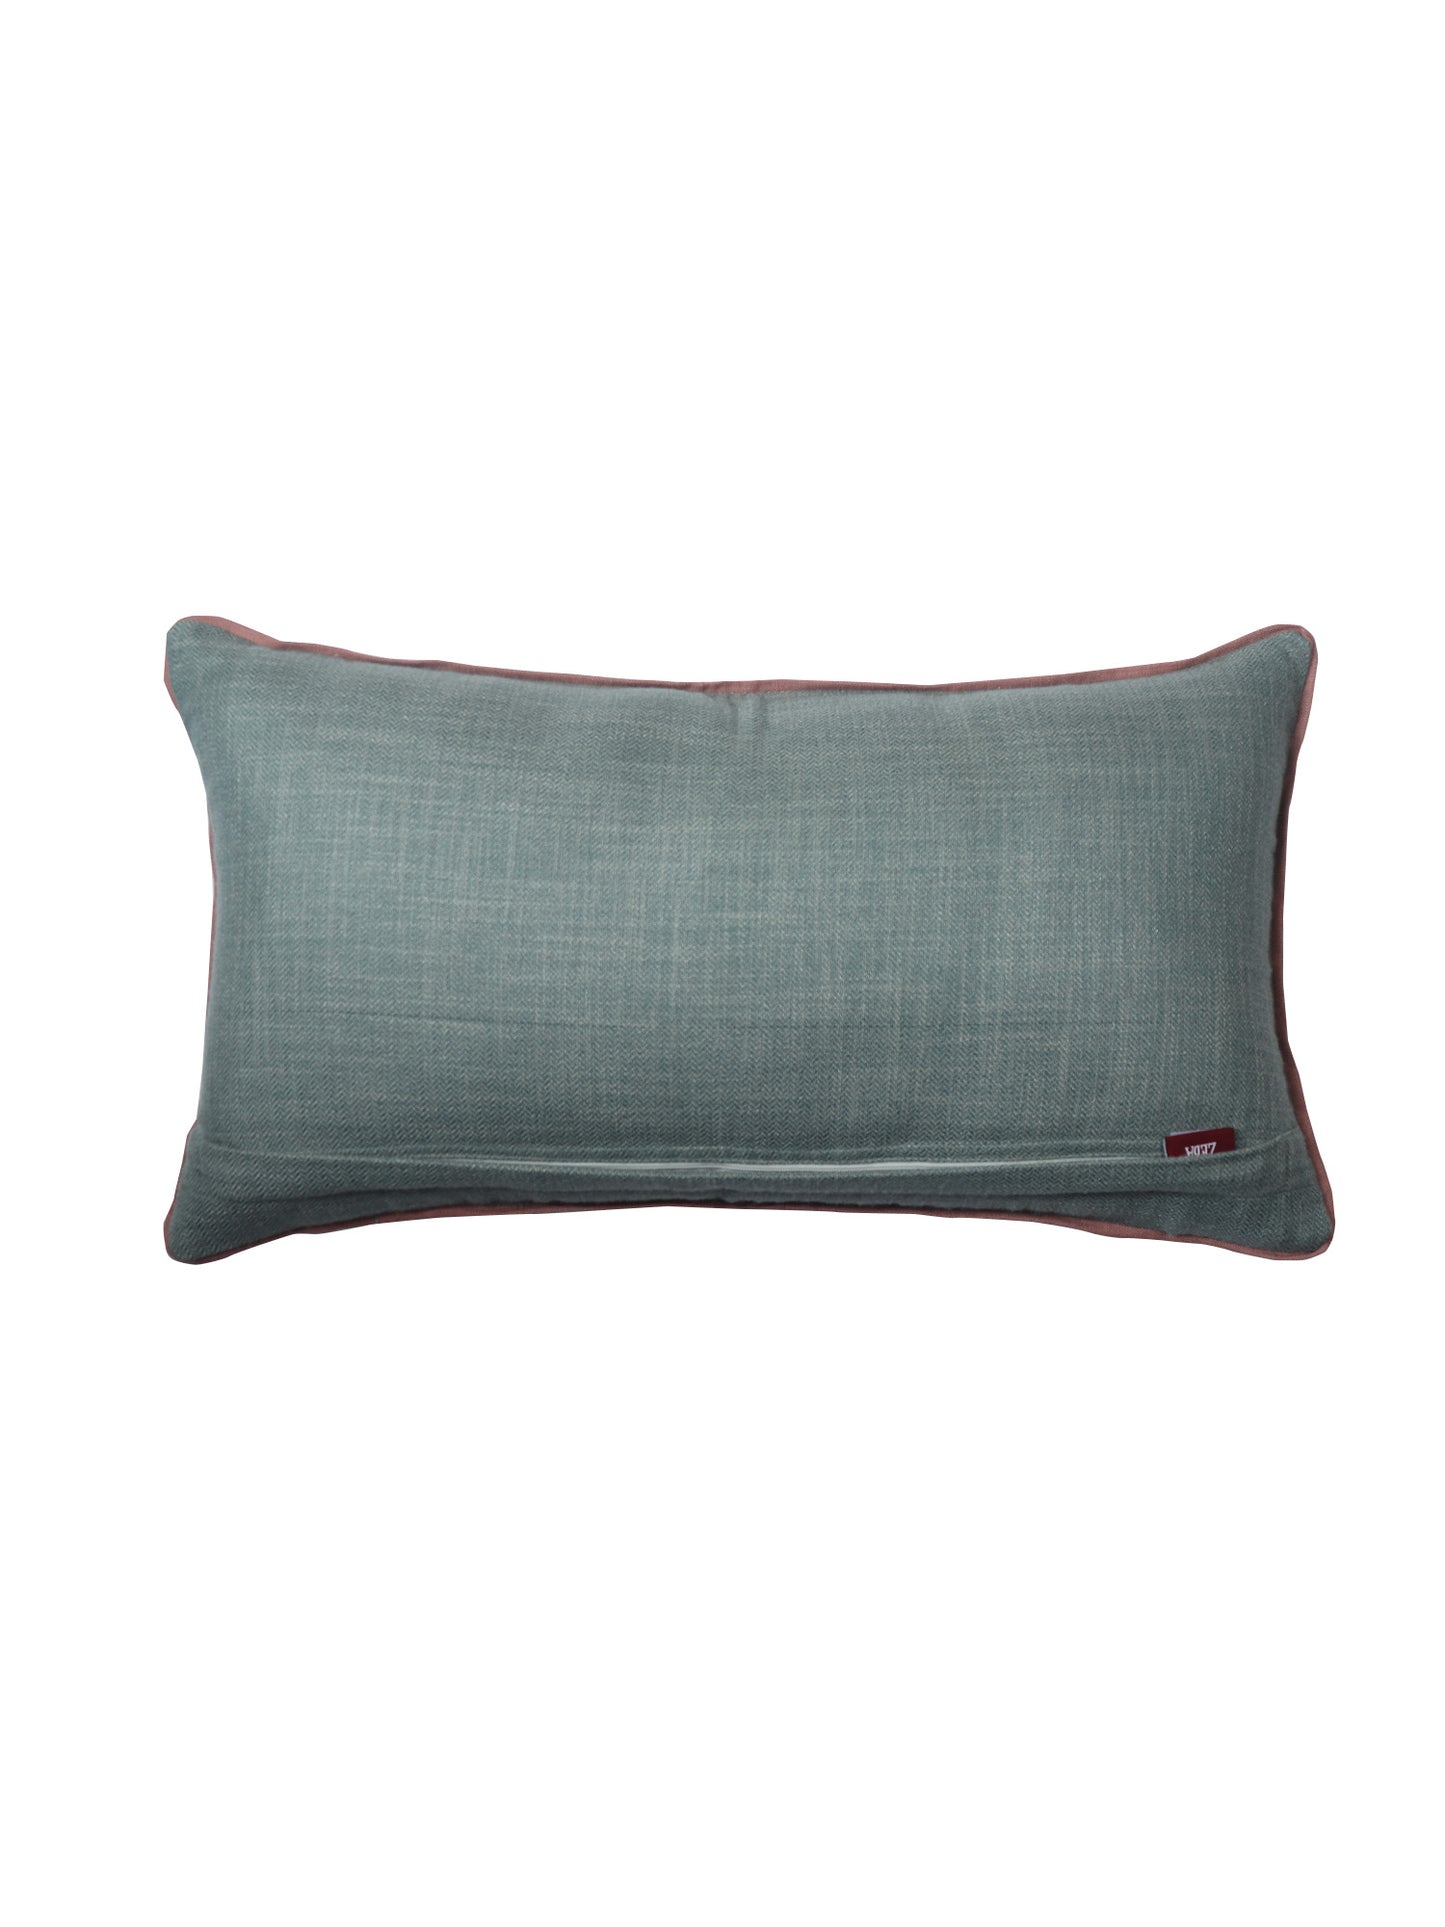 Cushion Cover for Sofa, Bed Cotton Blend |Self Textured with Cord Piping | Aqua Blue - 12x22in (30x56cm) (Pack of 1)